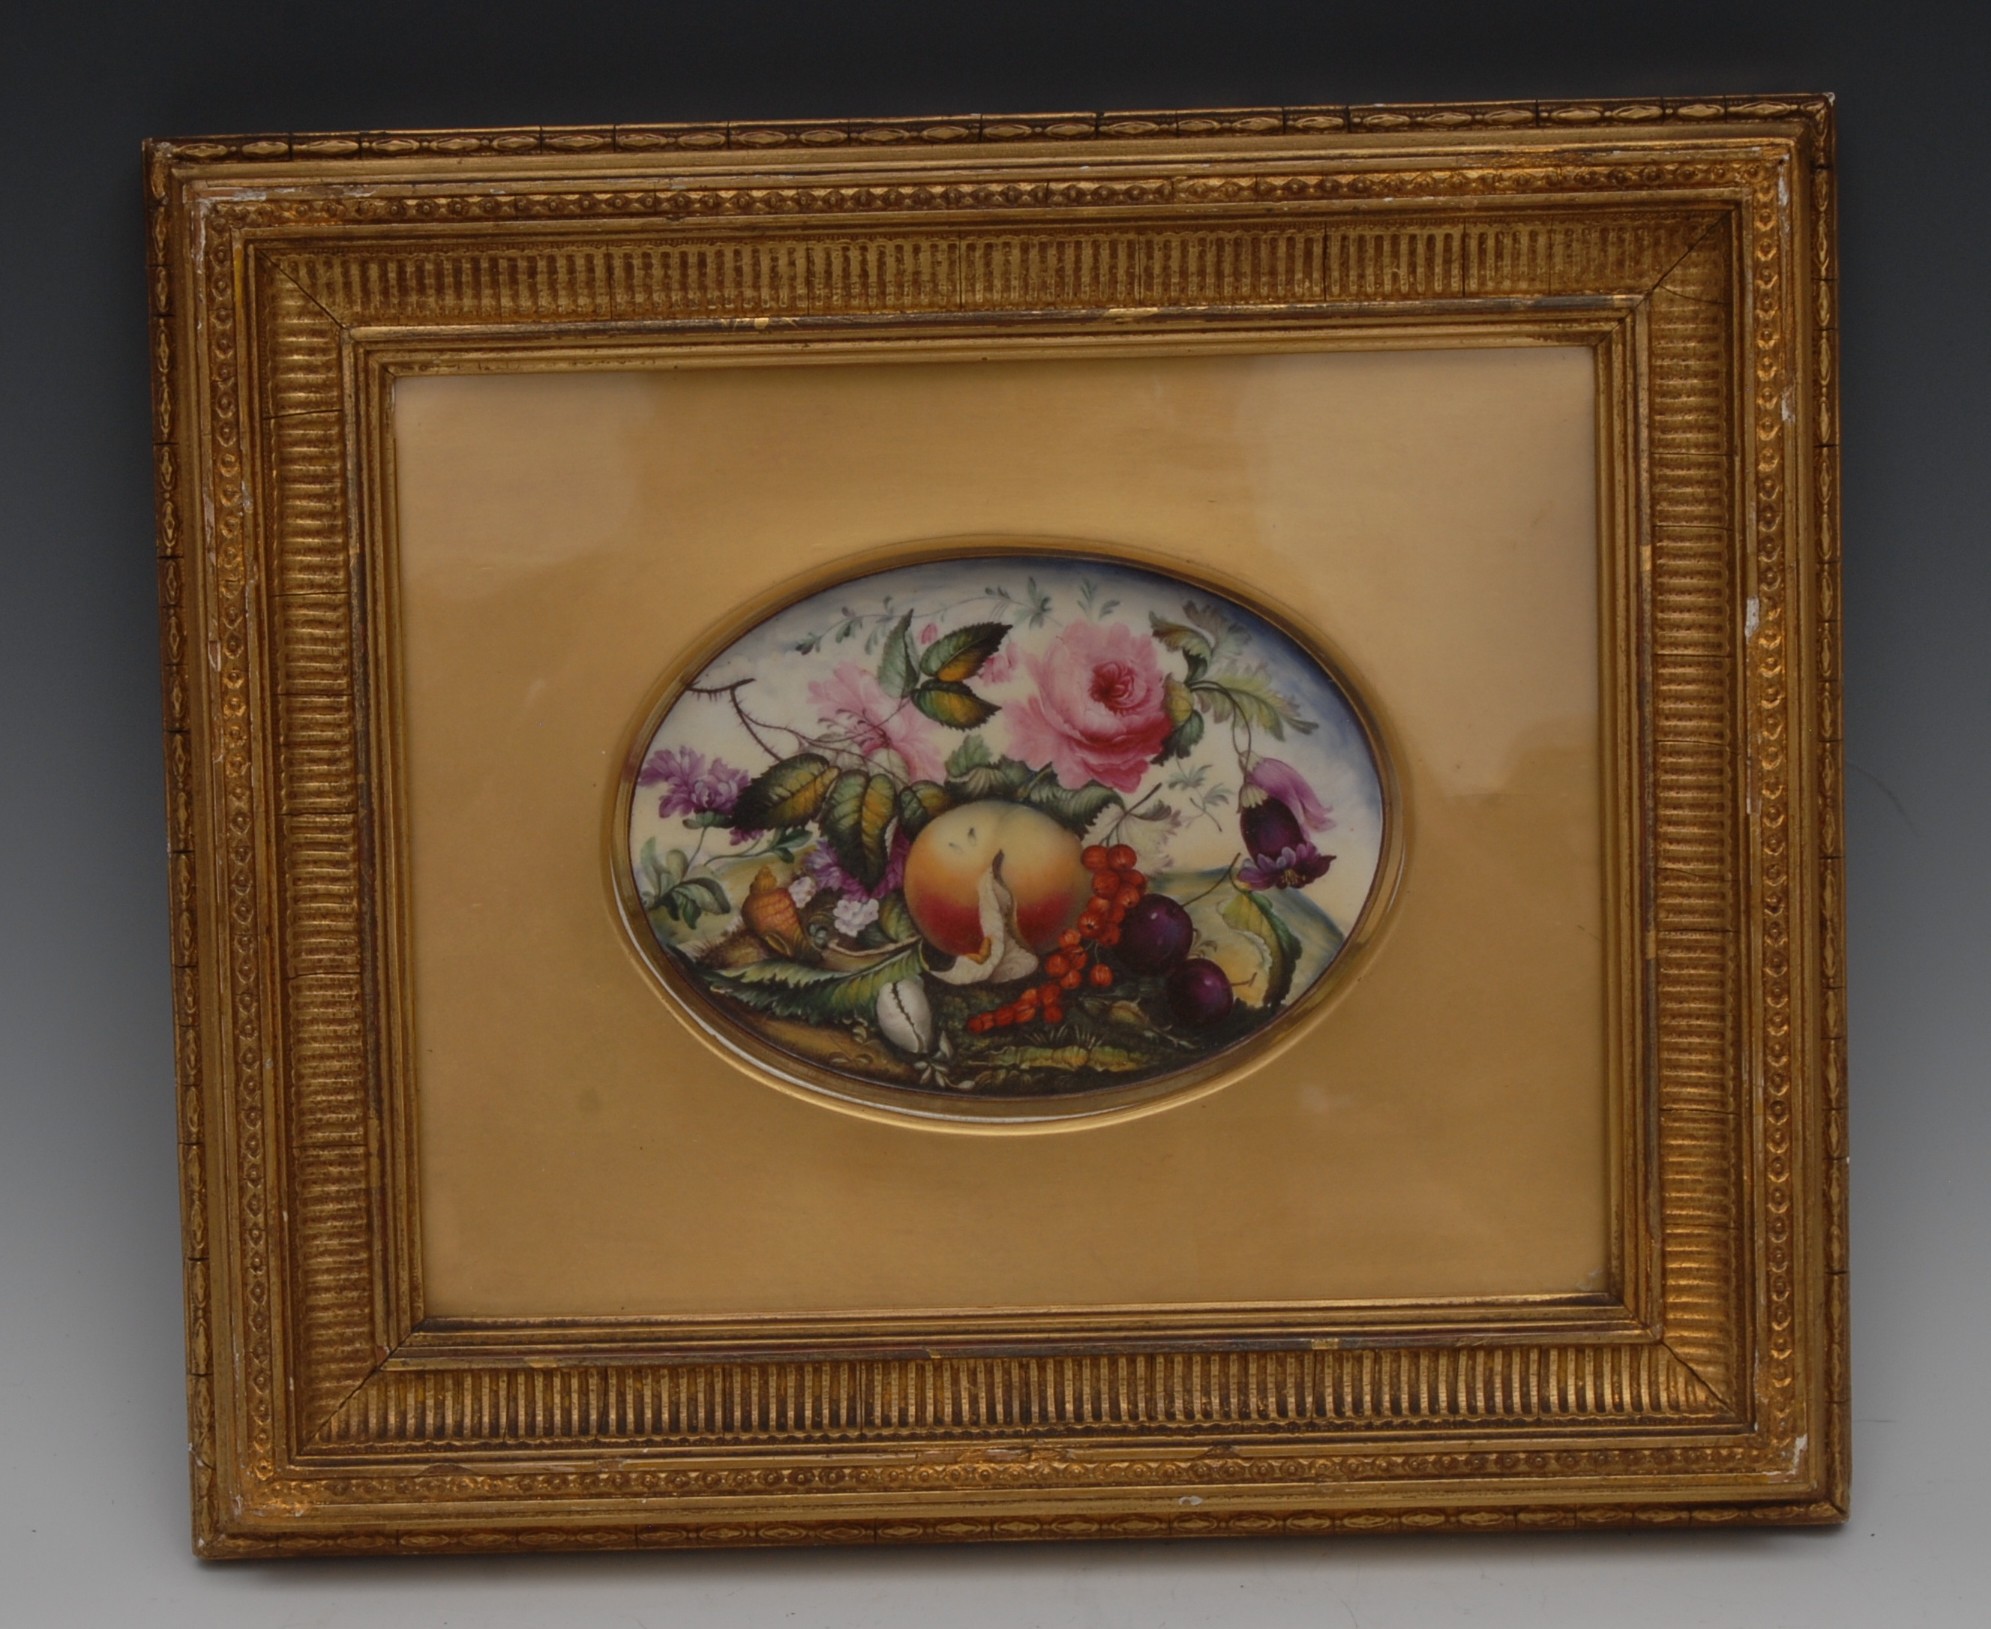 An English Porcelain oval plaque, well painted with peaches, peonies, berries, shells and foliage,